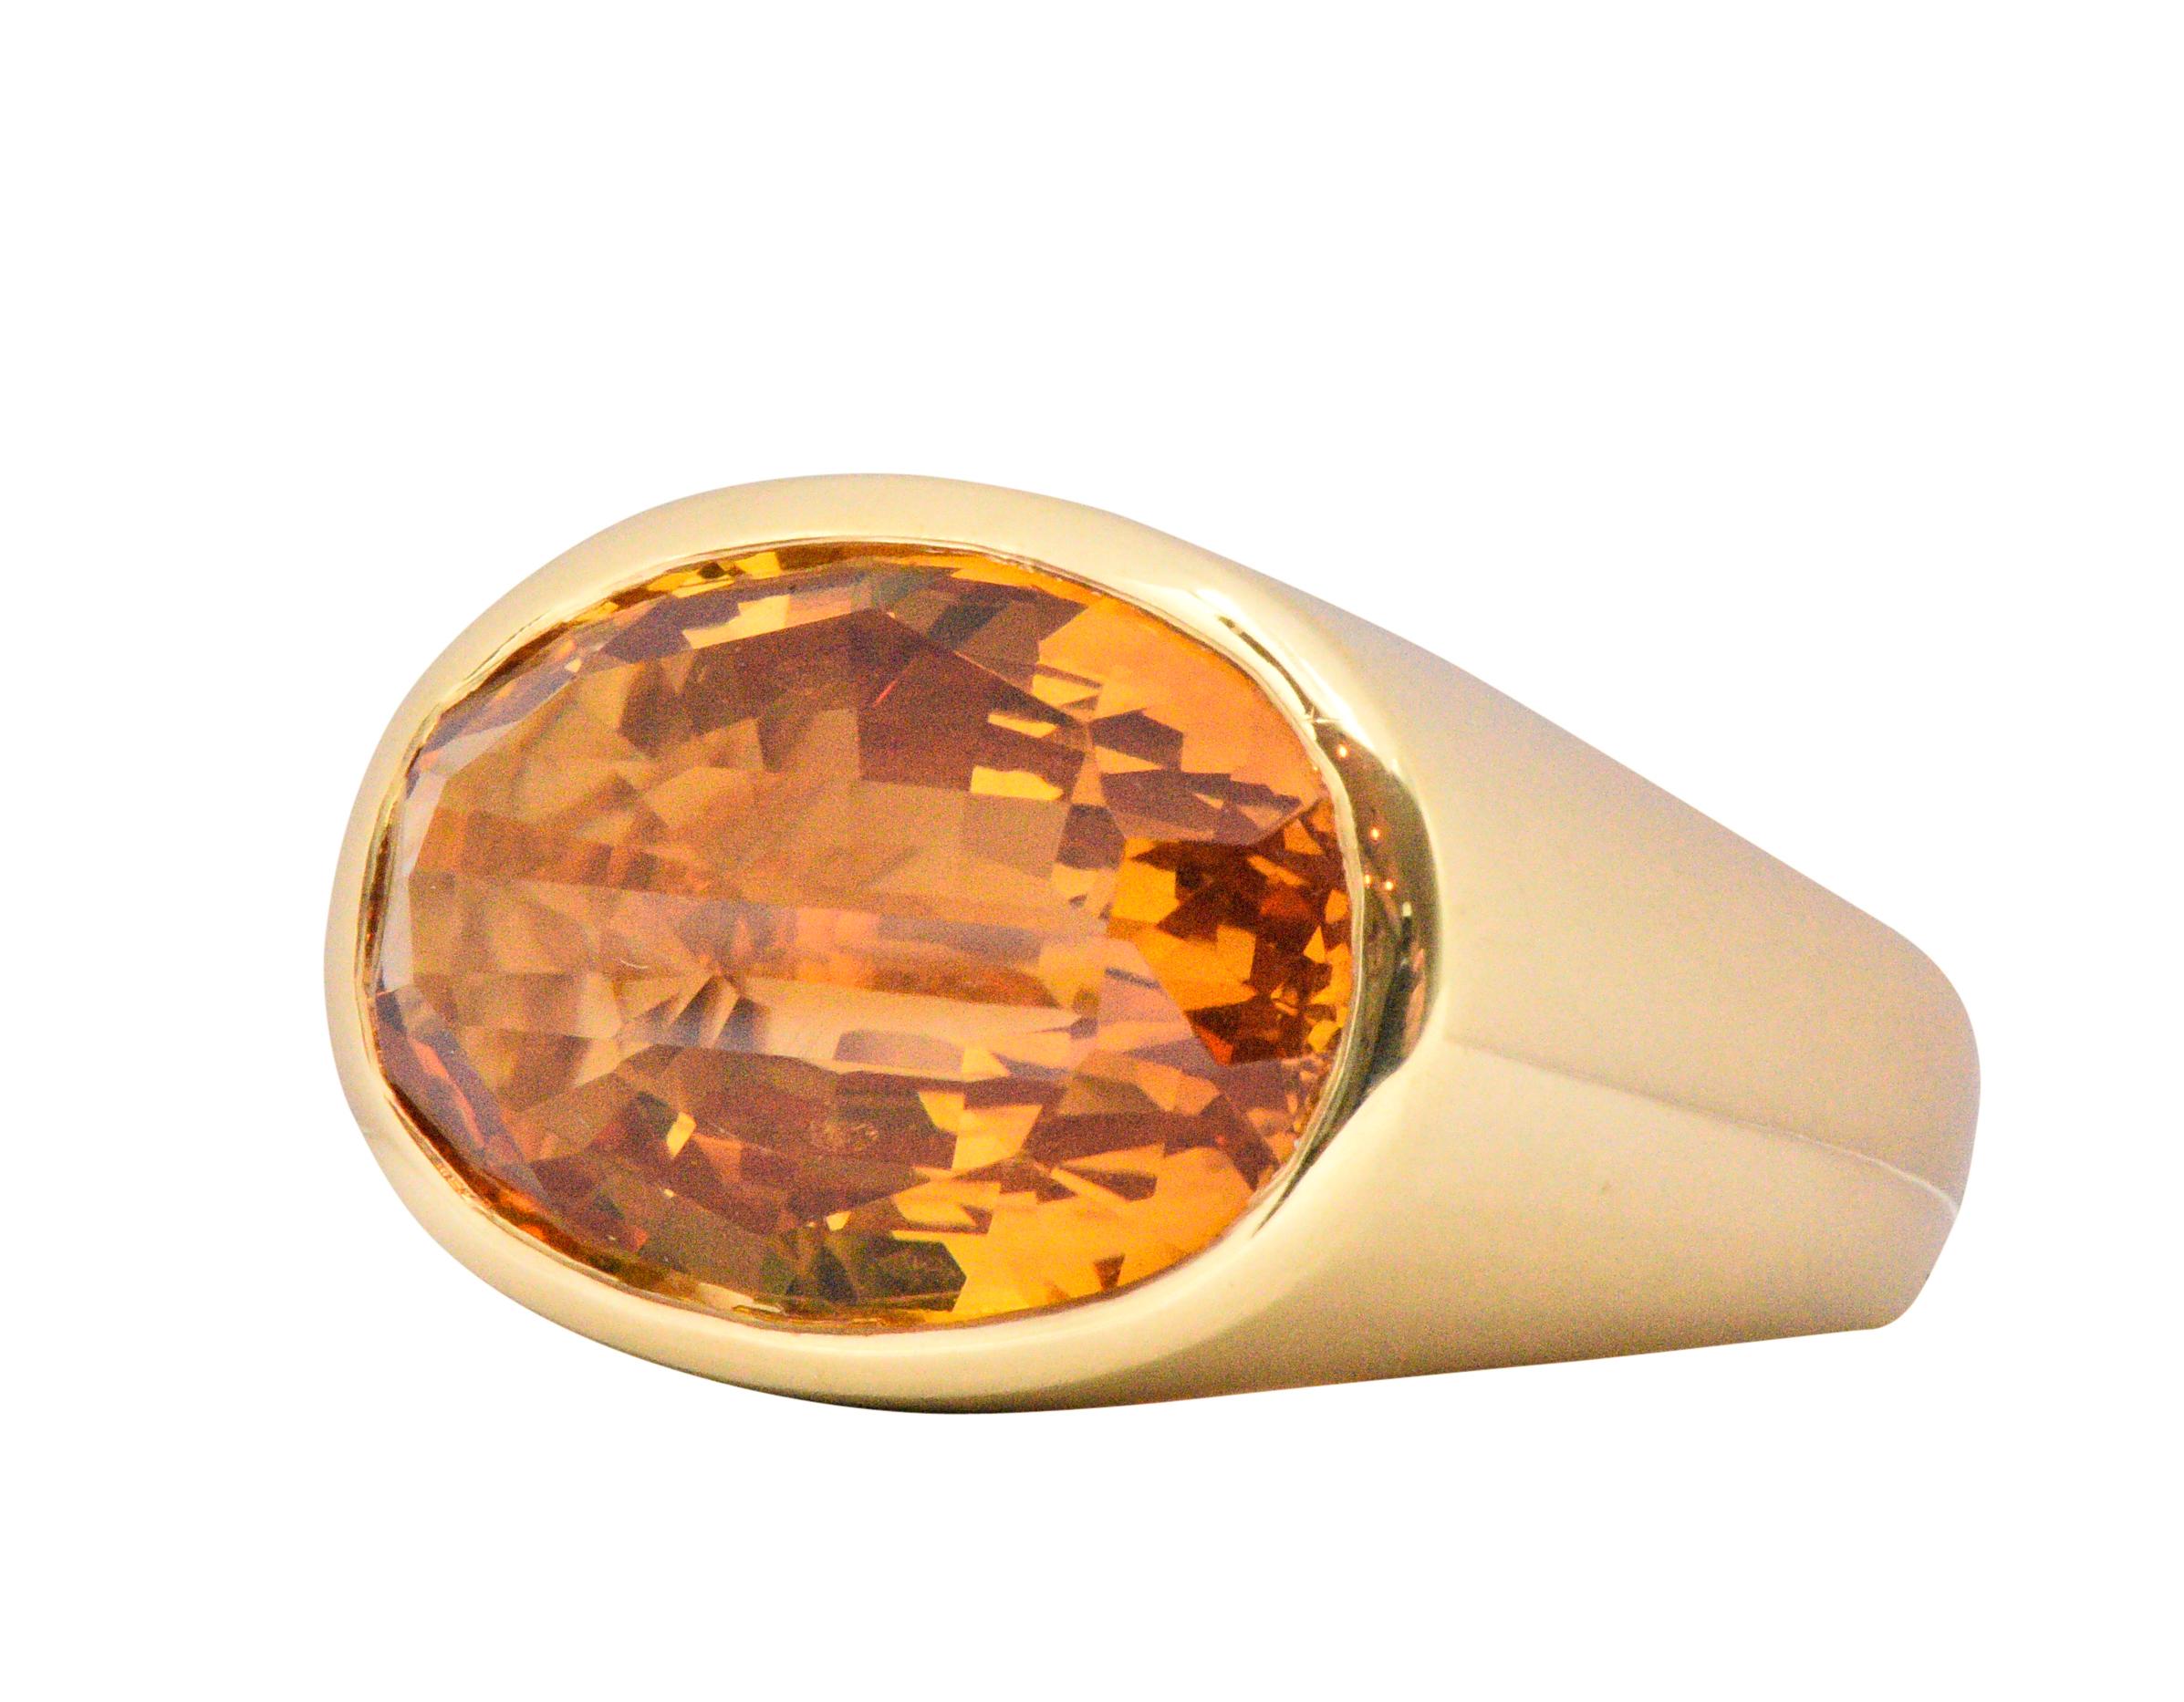 Centering an mixed rose cut citrine measuring approximately 19.9 x 15.5 x 9.0 mm, bright rich very slightly yellowish orange

The citrine is bezel set in polished gold

Fun and unique cut citrine making this a very special ring

With maker's mark